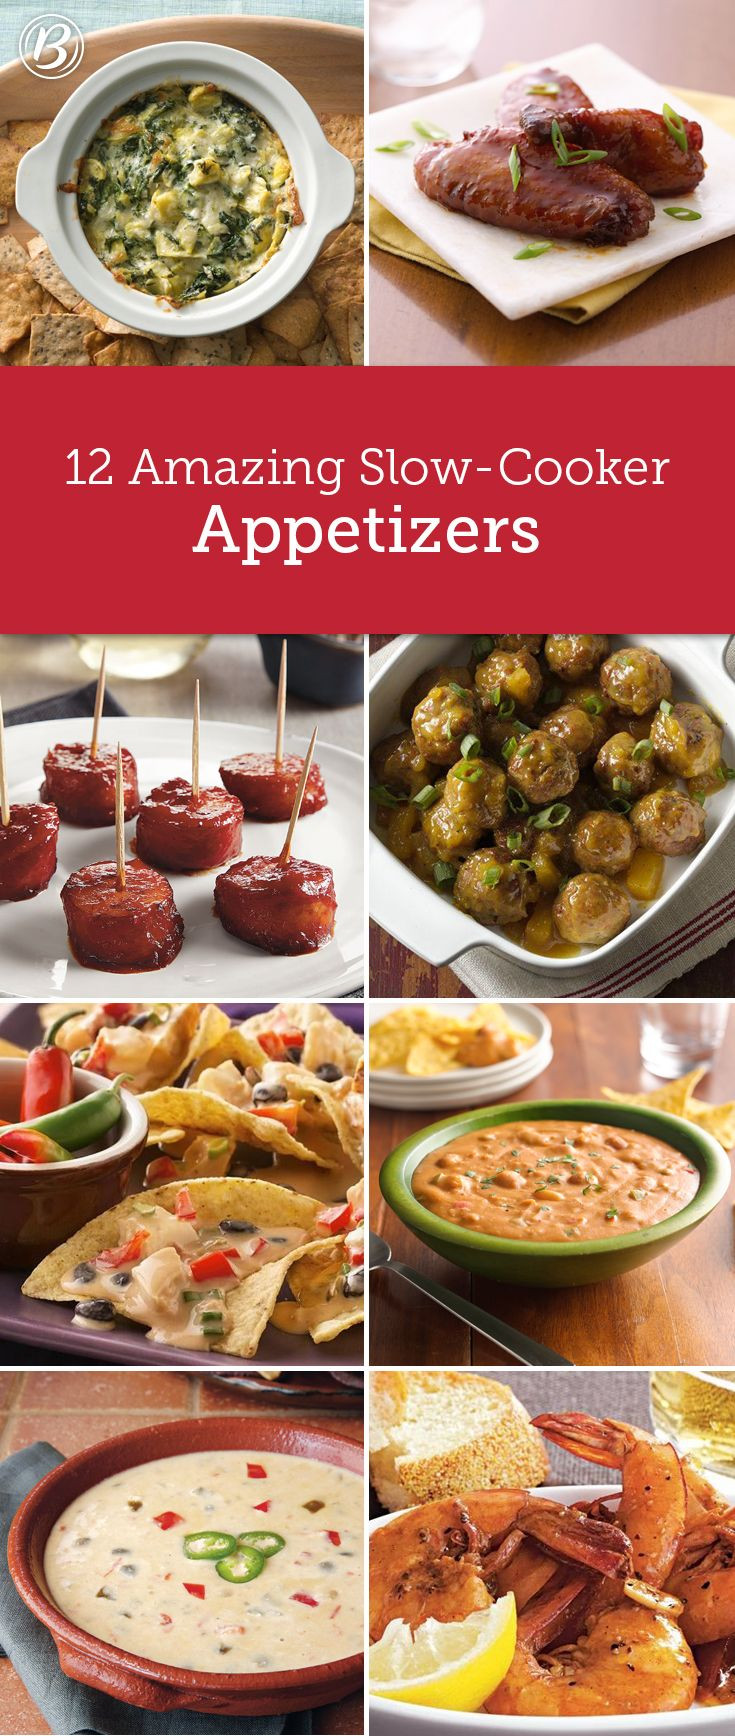 Slow Cooker Holiday Appetizers
 Slow Cooker Apps That Are Ready to Party